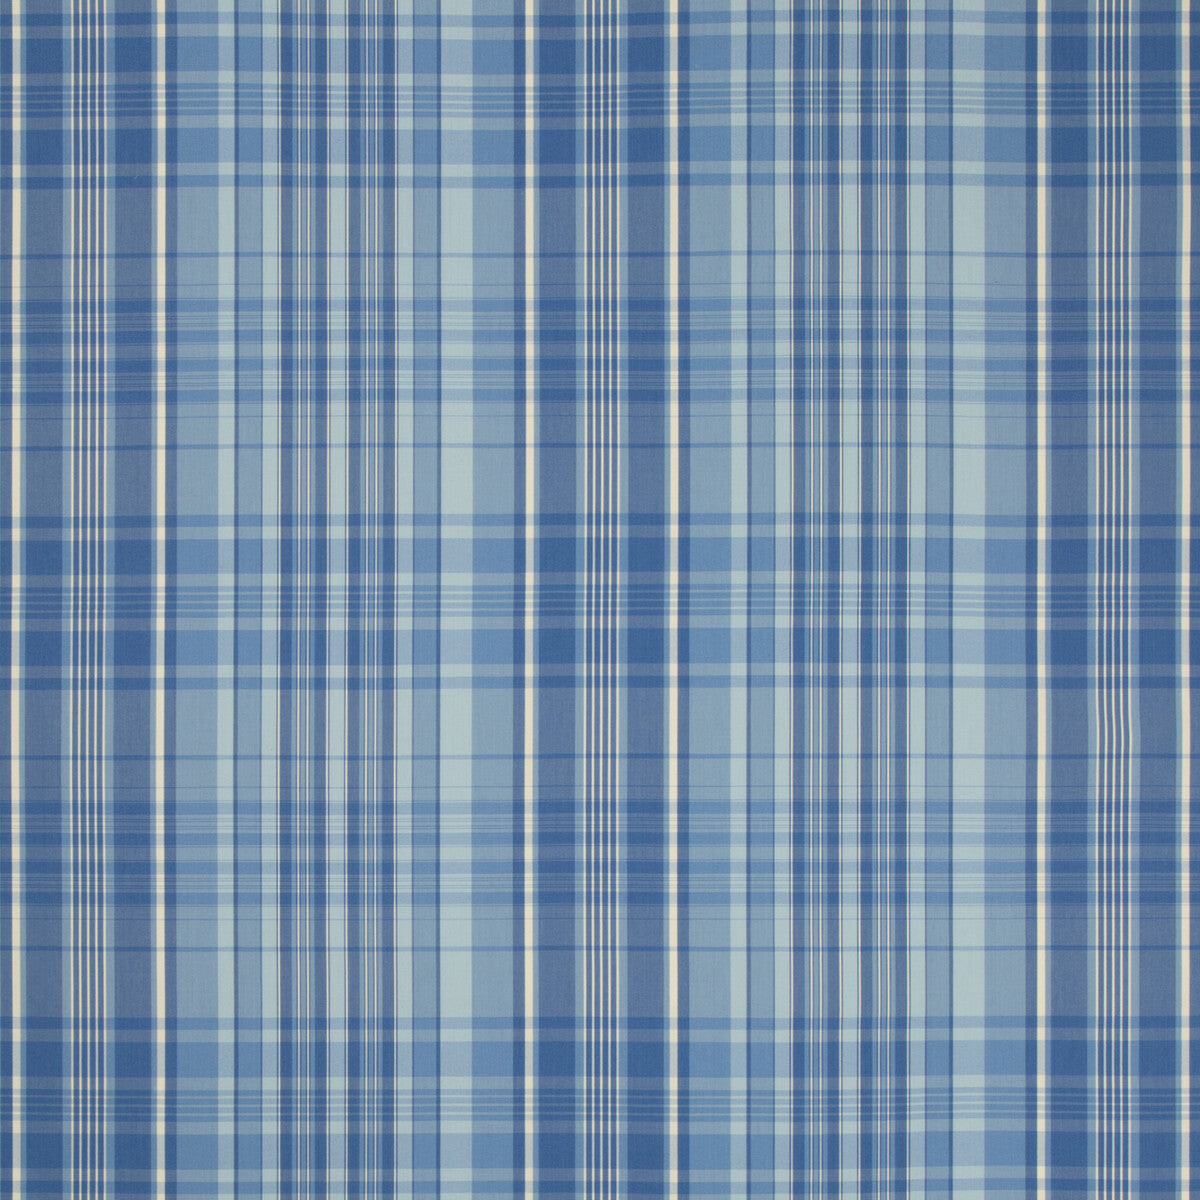 Guernsey Check fabric in blue color - pattern 8019101.5.0 - by Brunschwig &amp; Fils in the Normant Checks And Stripes collection